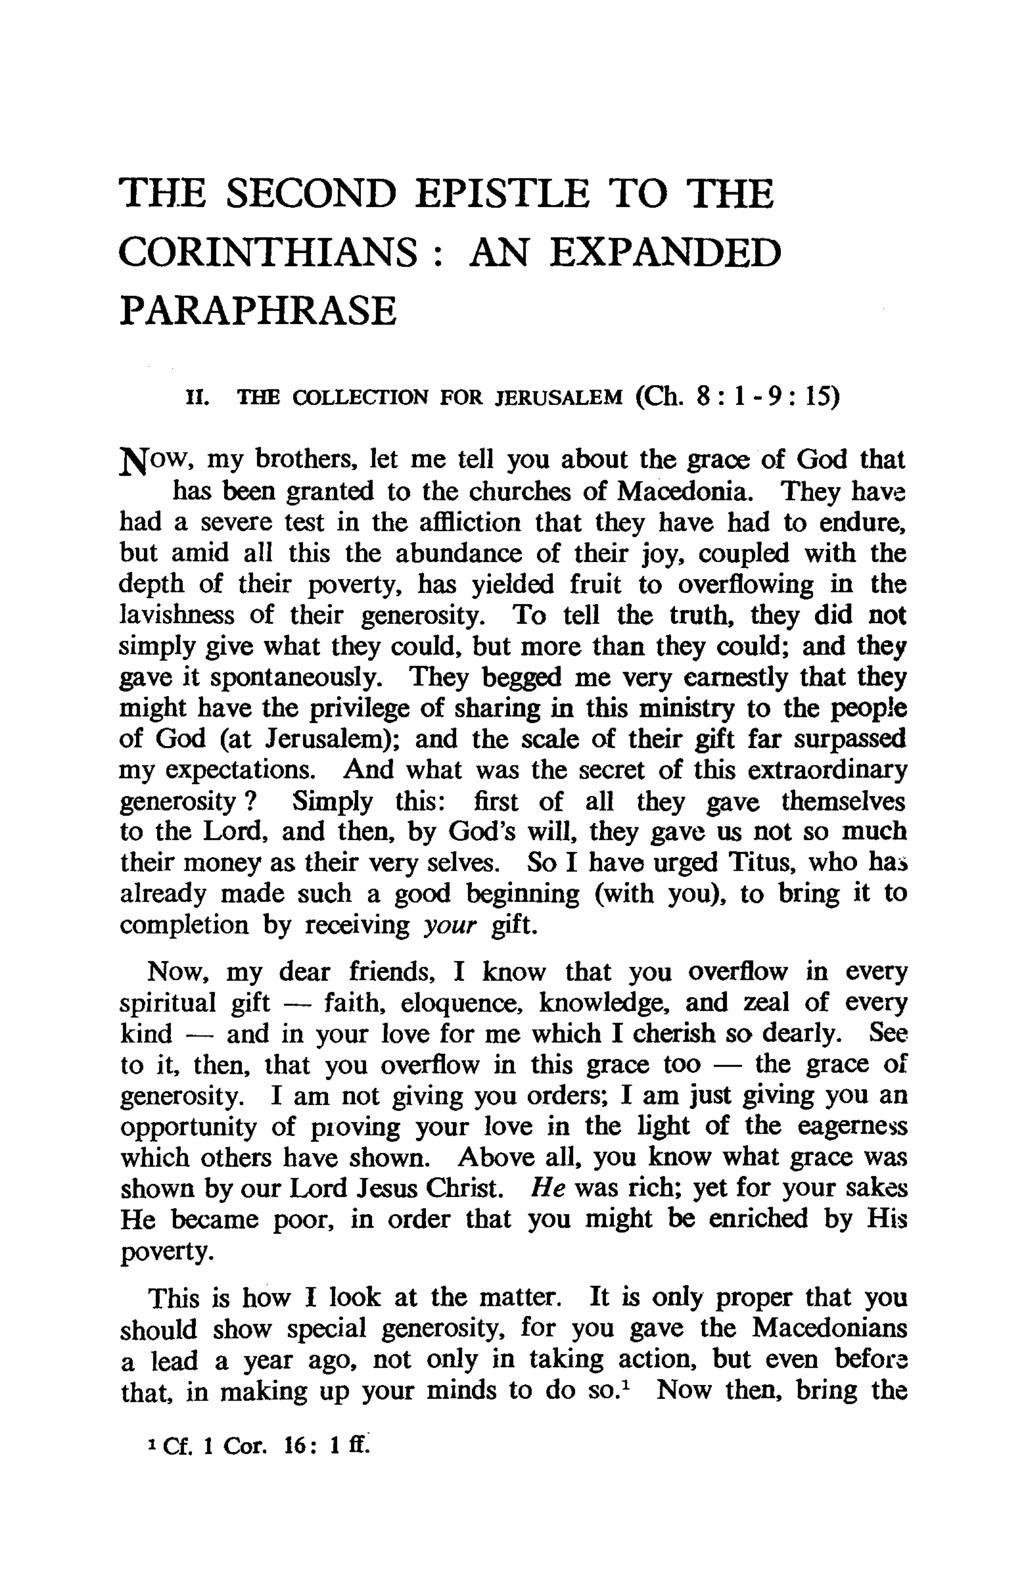 THE SECOND EPISTLE TO THE CORINTHIANS: AN EXPANDED PARAPHRASE 11. THE COLLECfION FOR JERUSALEM (Ch.